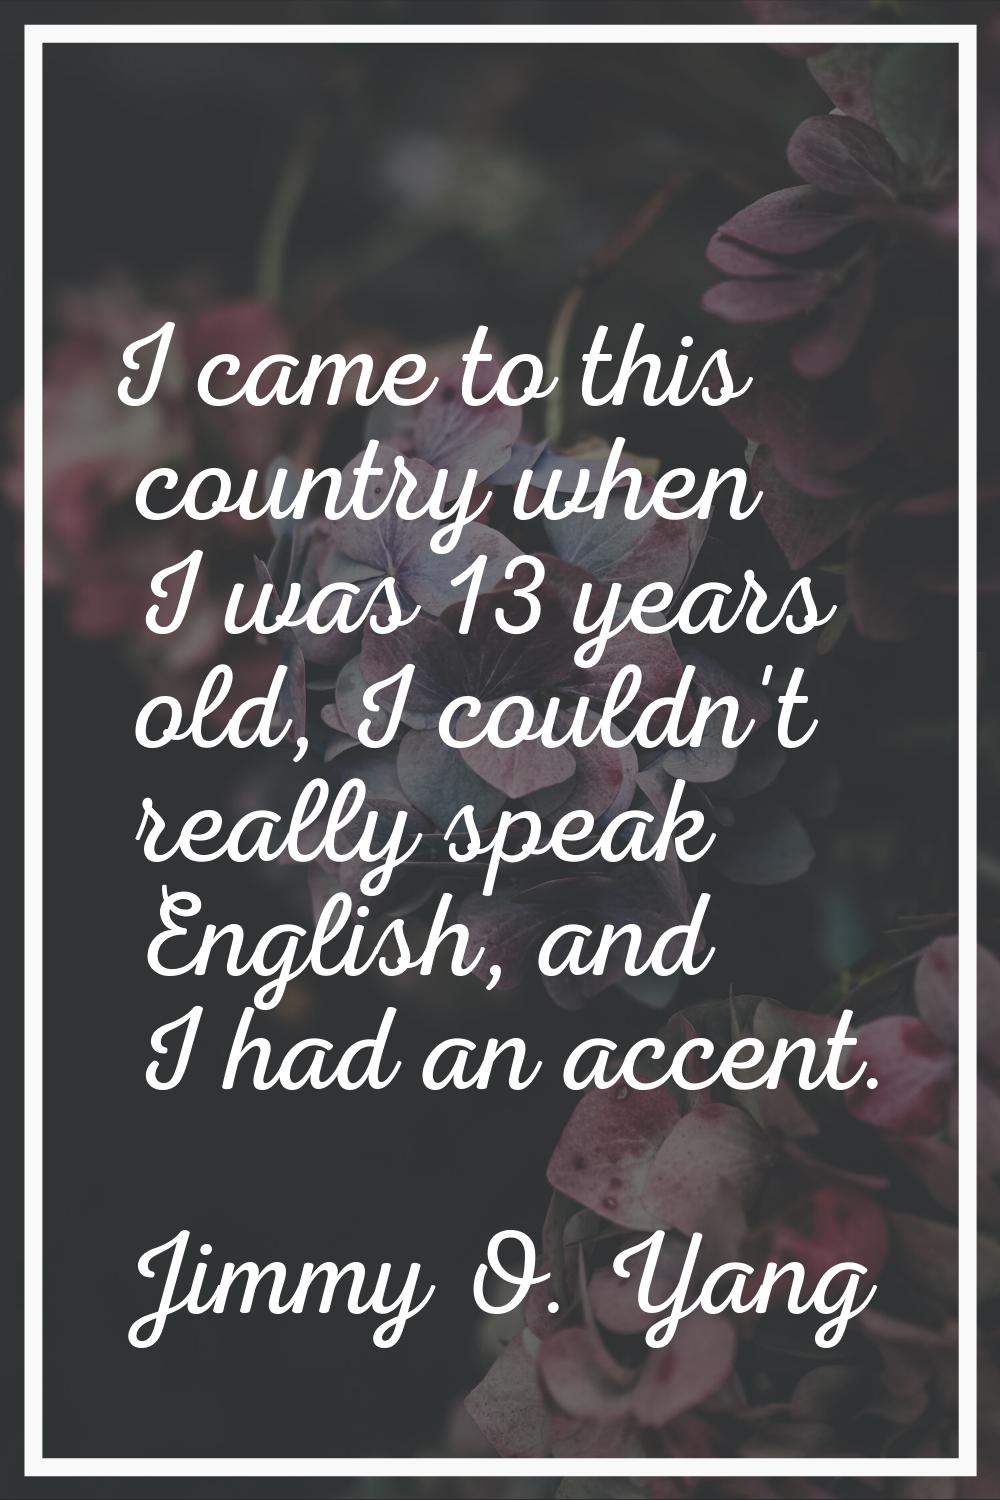 I came to this country when I was 13 years old, I couldn't really speak English, and I had an accen